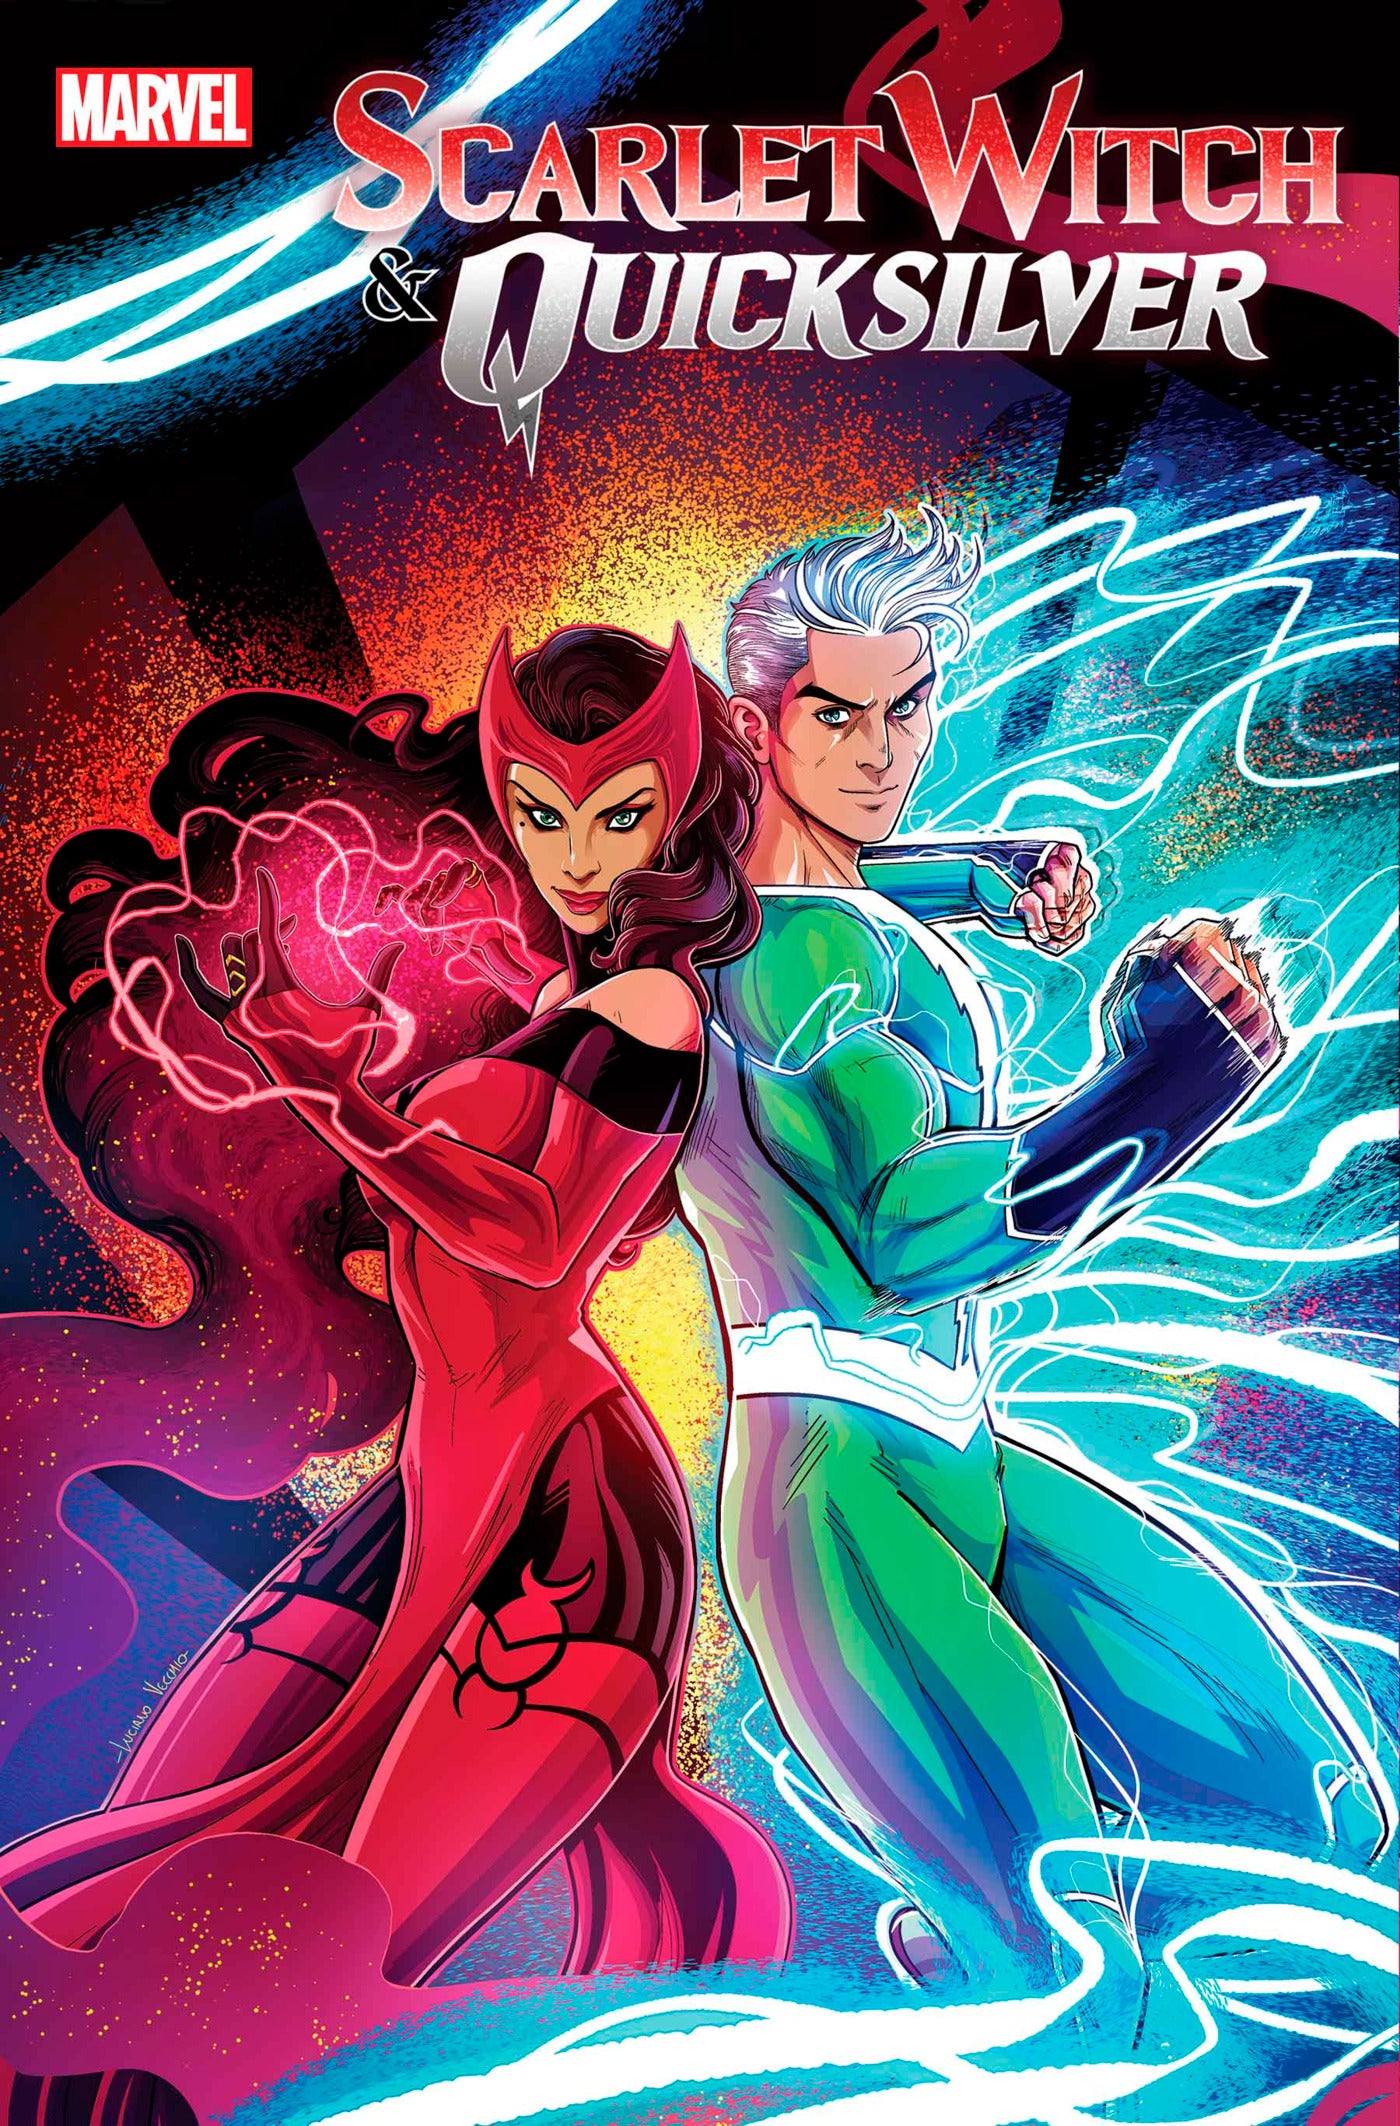 NYCC 2023: New 'Scarlet Witch & Quicksilver' Comic Series Announced